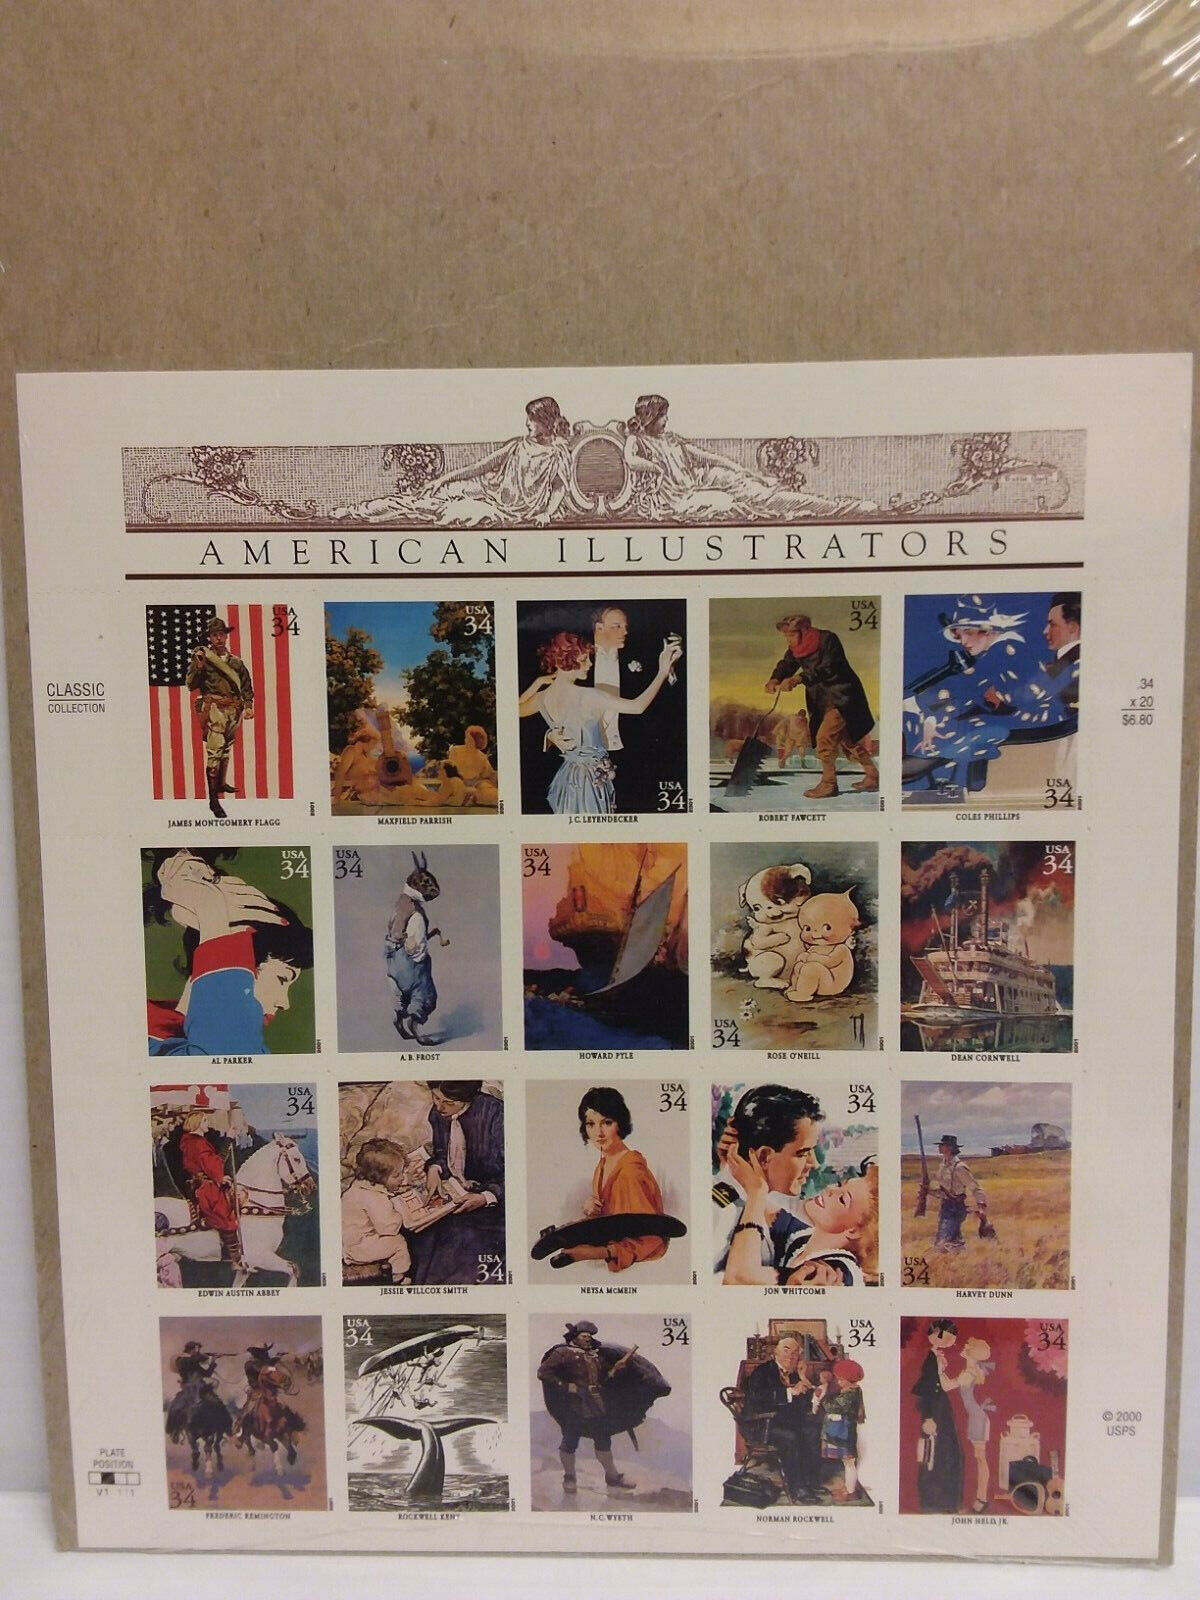 US Postage Stamp Collection: Full Page, Posted FIrst Day Issue, Inverted Centers Без бренда - фотография #5